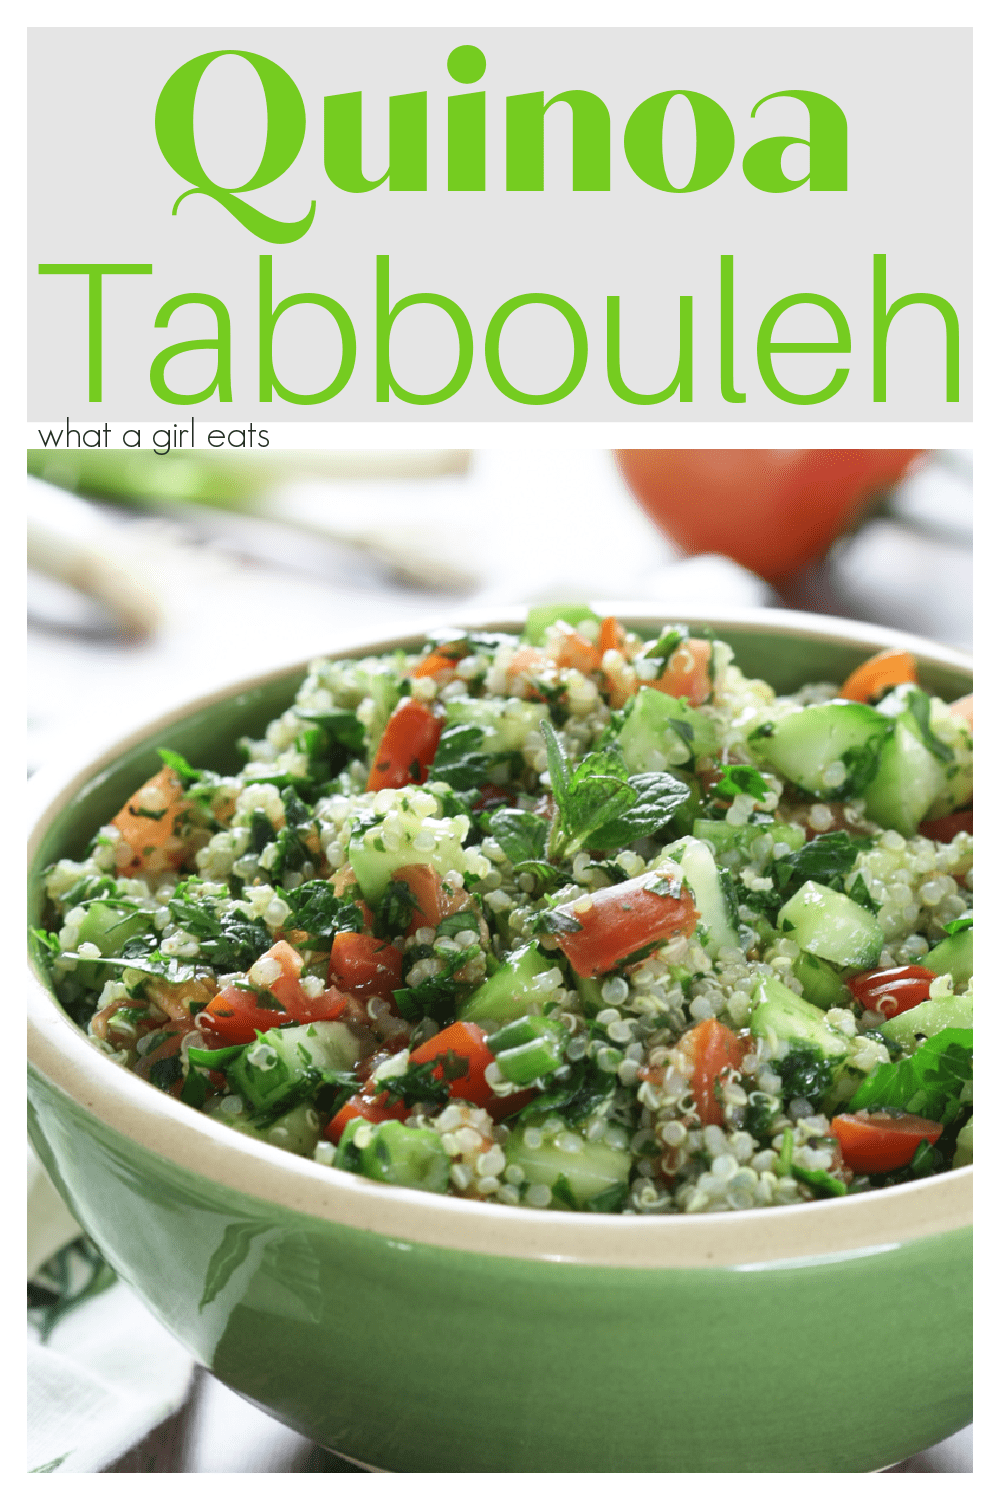 Quinoa Tabbouleh is a healthy, gluten free side dish with fresh parsley, cucumbers and tomatoes, this salad is full of flavor!